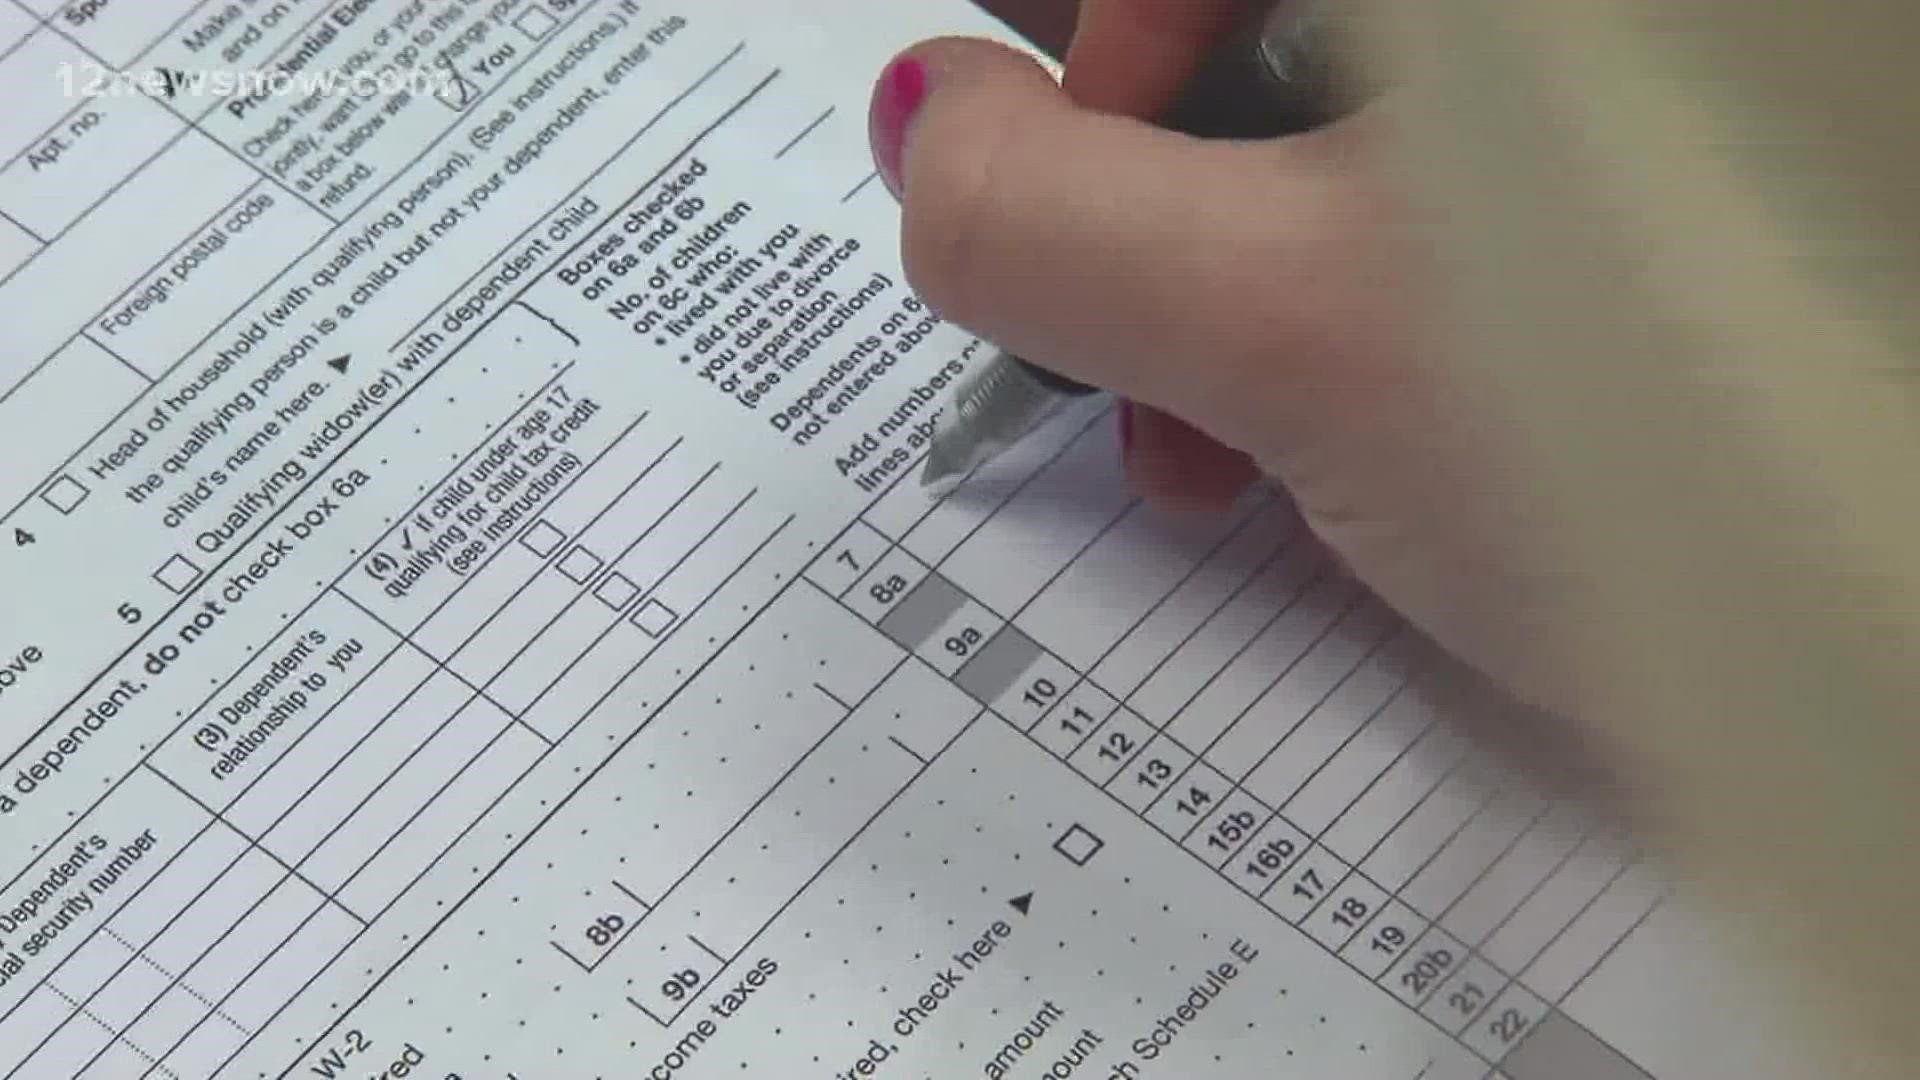 Families who are not required to file a tax return now have a way to file for the child tax credit.